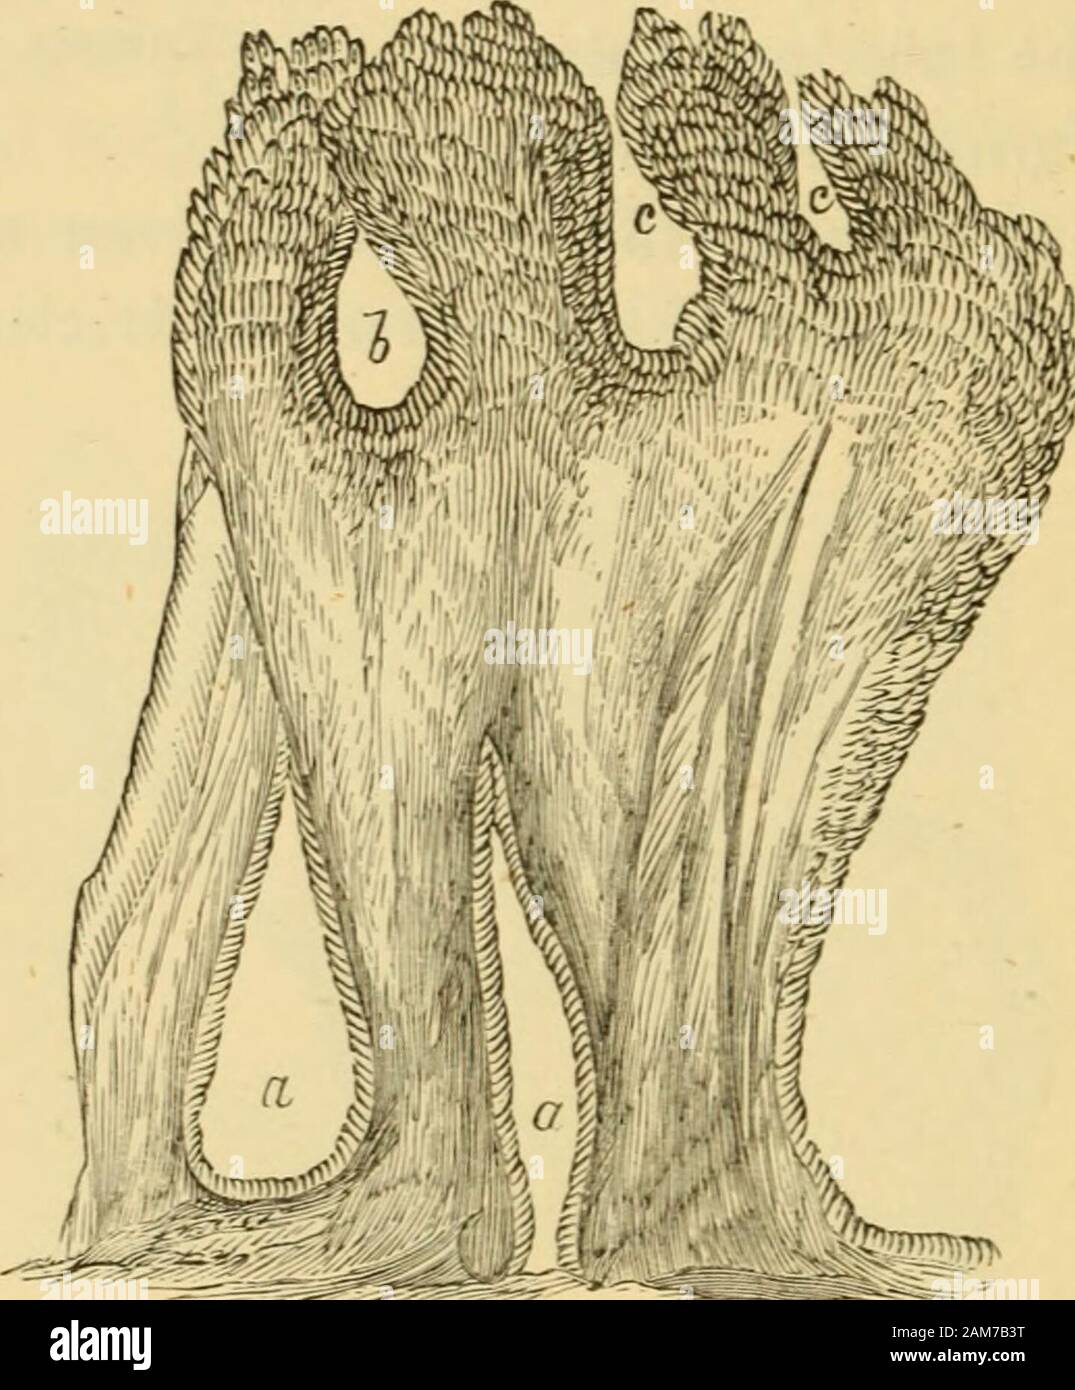 Diseases of the ovaries : their diagnosis and treatment . Formation of Secondary Cysts, by Tubular Processes given off from Cysts in thickerportions of Stroma. ( x 2.i0 Diam. reduced.) 4.s WILSON FOX ON OVARIAN CYSTS. The third class of cases investigated by Dr. Fox were thosewhere cysts are found associated with cauliflower growths spring-ing from the interior of the parent cysts. This class, to whichthe theory of the origin of cysts from single cells has beenchiefly applied by Rokitansky, has received a different explana-tion from Dr. Fox. He describes these growths as solidmasses, consistin Stock Photo